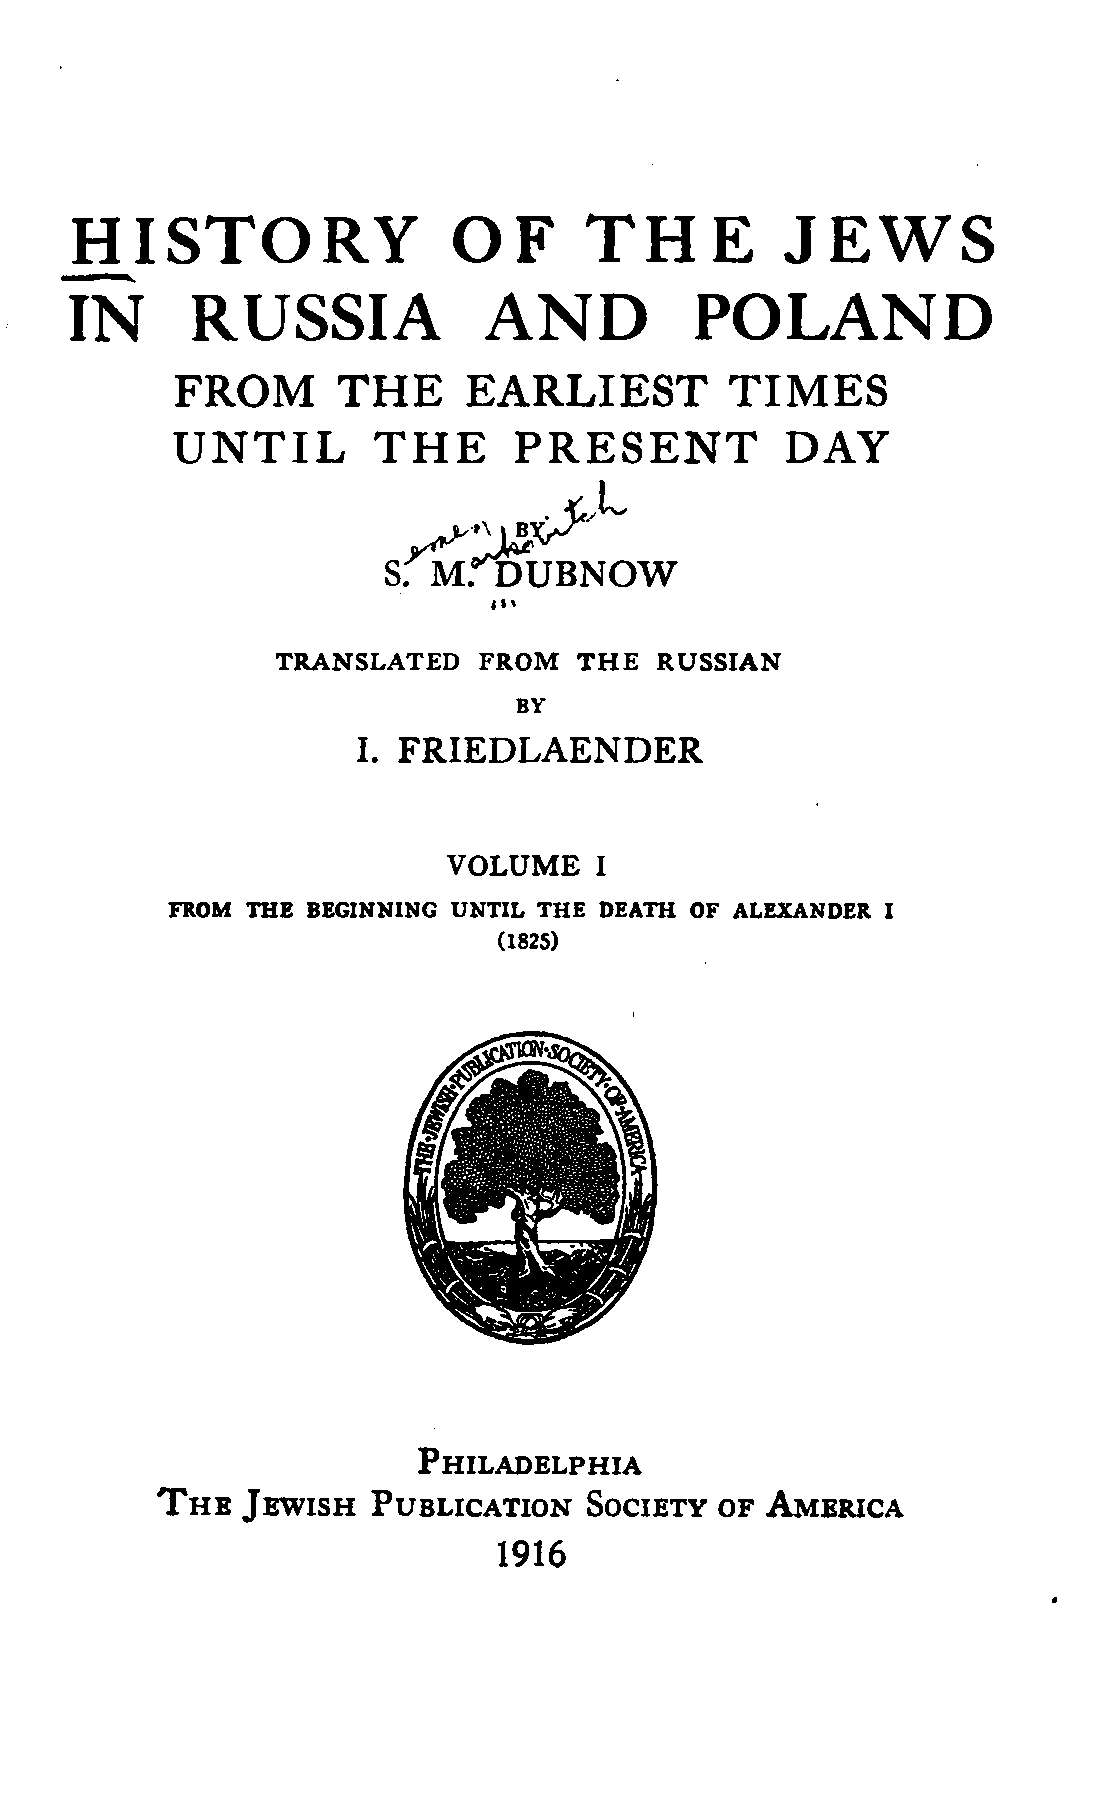 History of the Jews in Russia and Poland, Volume 1 [of 3]&#10;From the Beginning until the Death of Alexander I (1825)